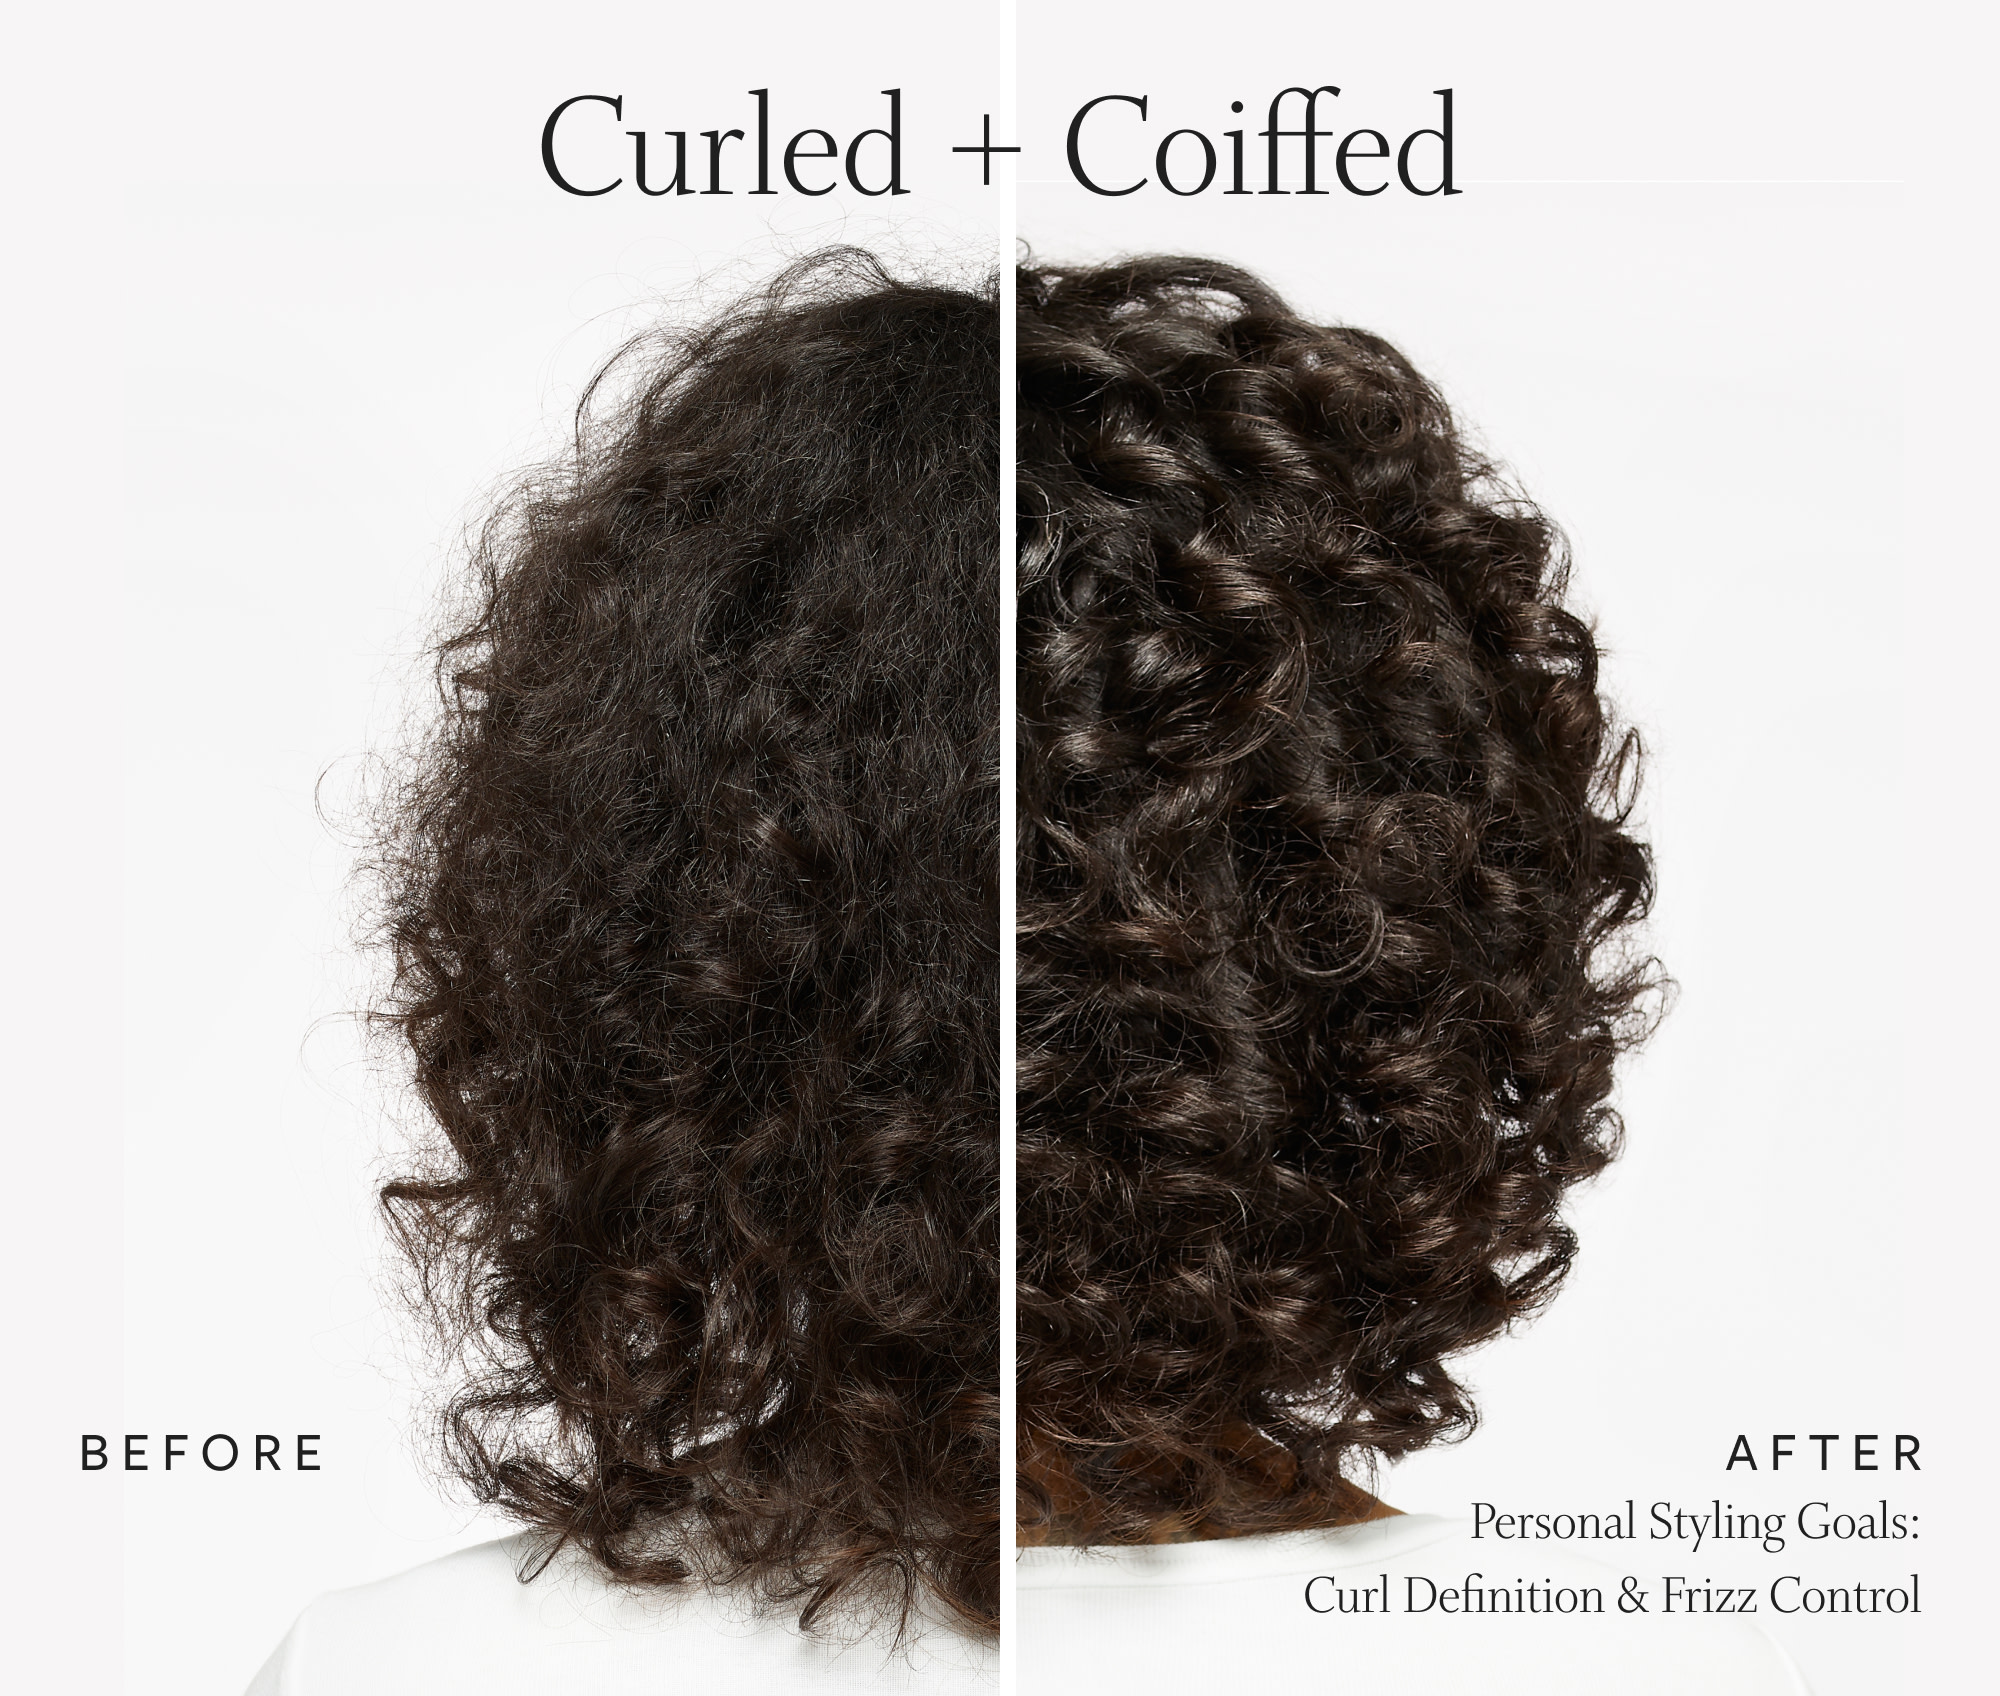 Before and after showing shiny and defined curls after using the styling primer. Hair goals included curl definition and frizz control.